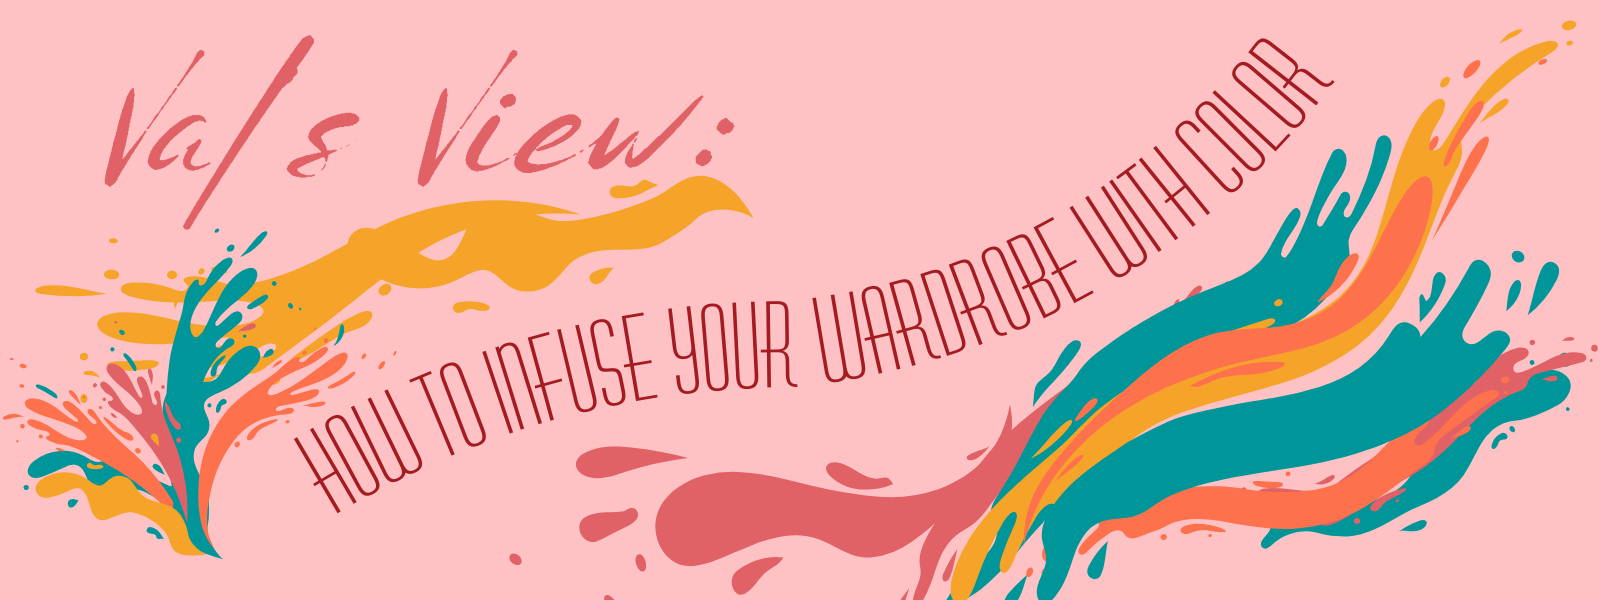 Val's View: How to Infuse Your Wardrobe with Color